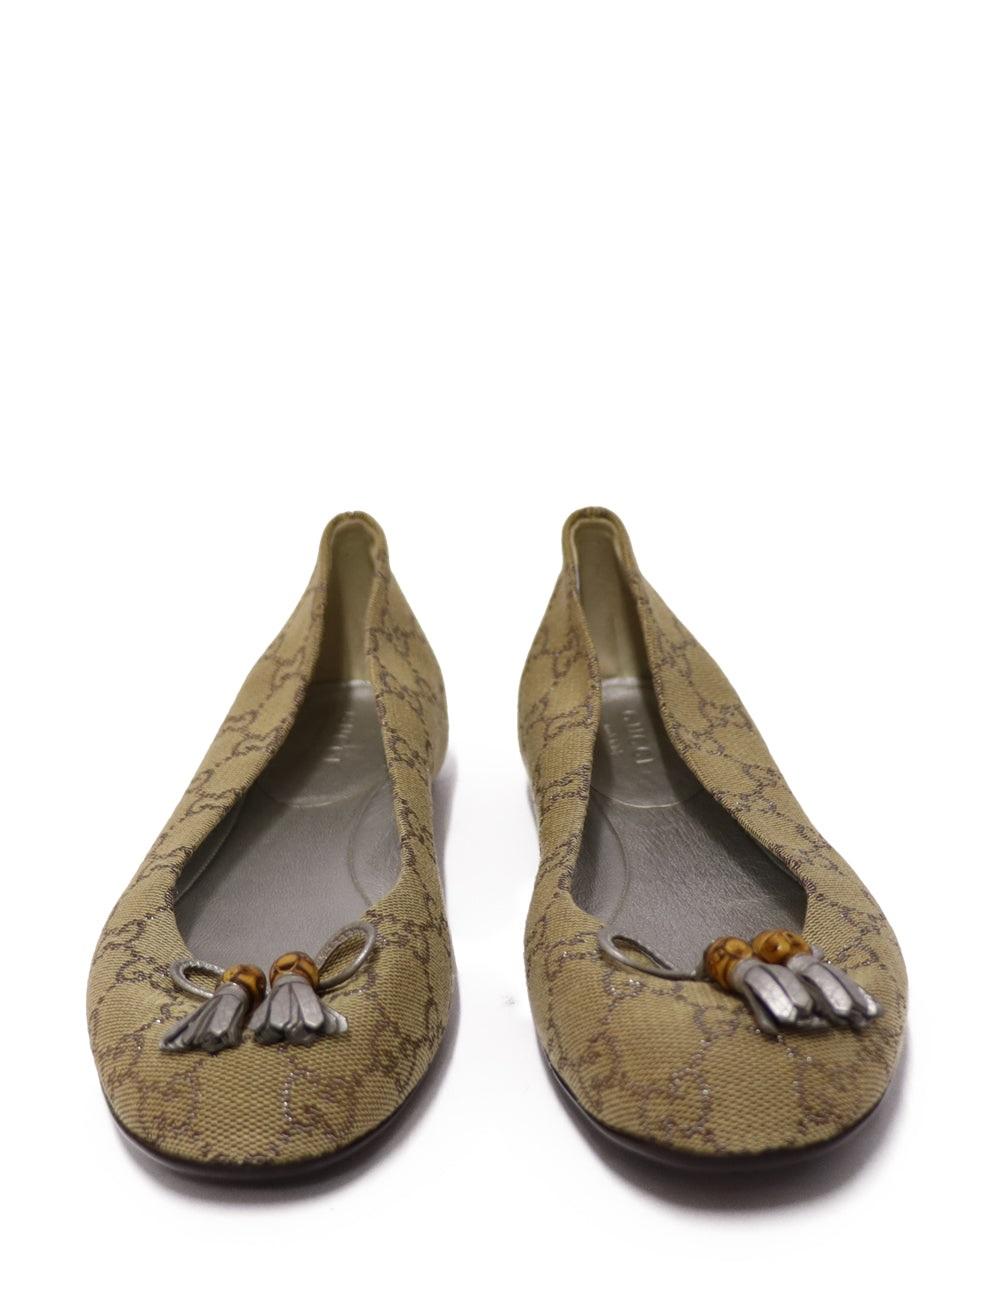 Gucci Beige GG monogram canvas Ballet Flats. Featuring silver bow with iconic bamboo details.

Material: Canvas
Size: EU 36
Overall Condition: Good
Interior Condition: Signs of use
Exterior Condition: no visible signs of wear